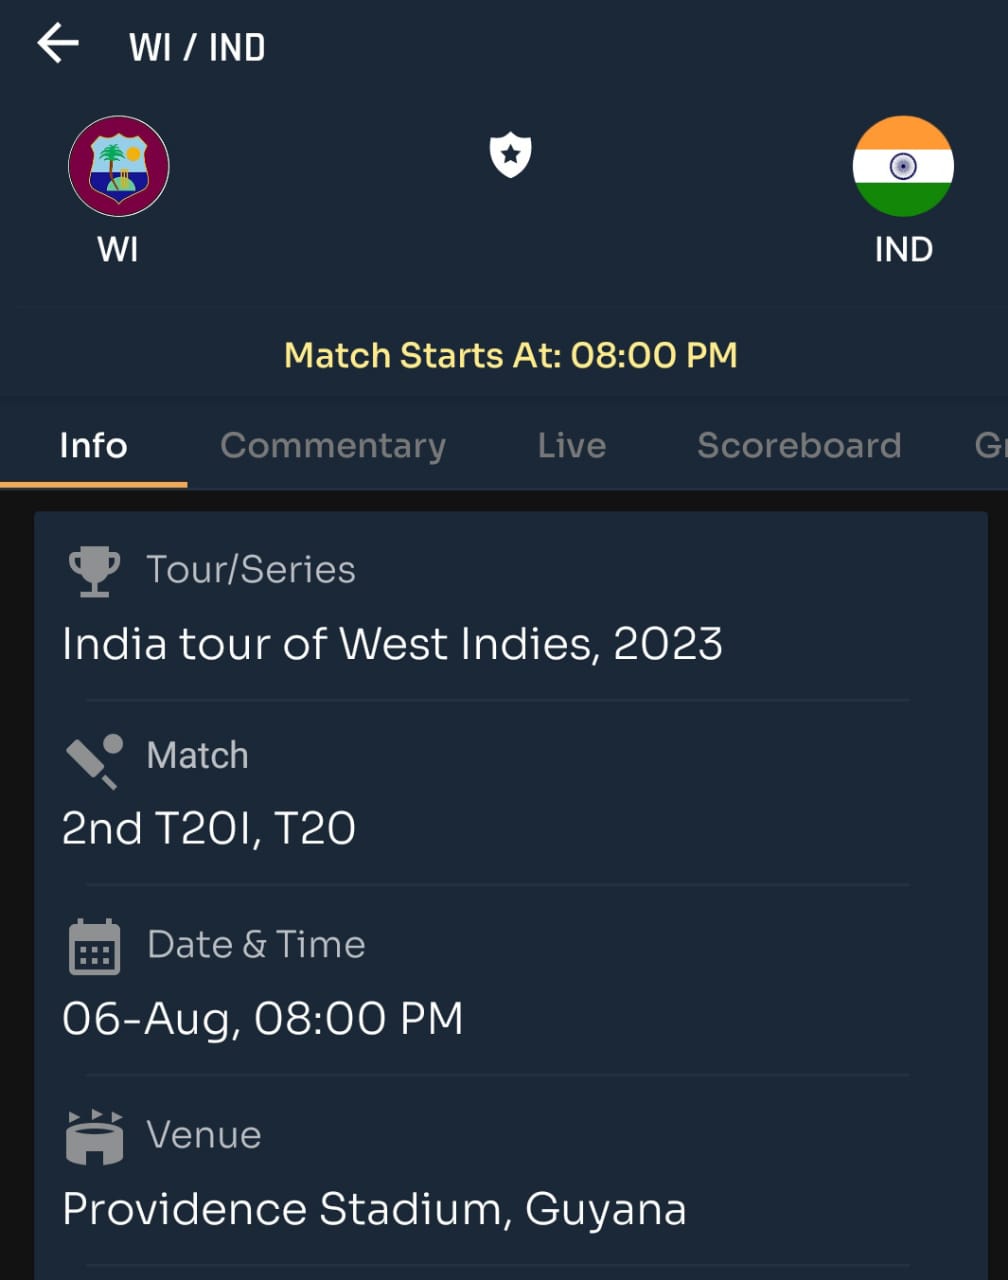 IND vs WI 2nd T20 Match Prediction: Toss Analysis, Pitch & Weather Report